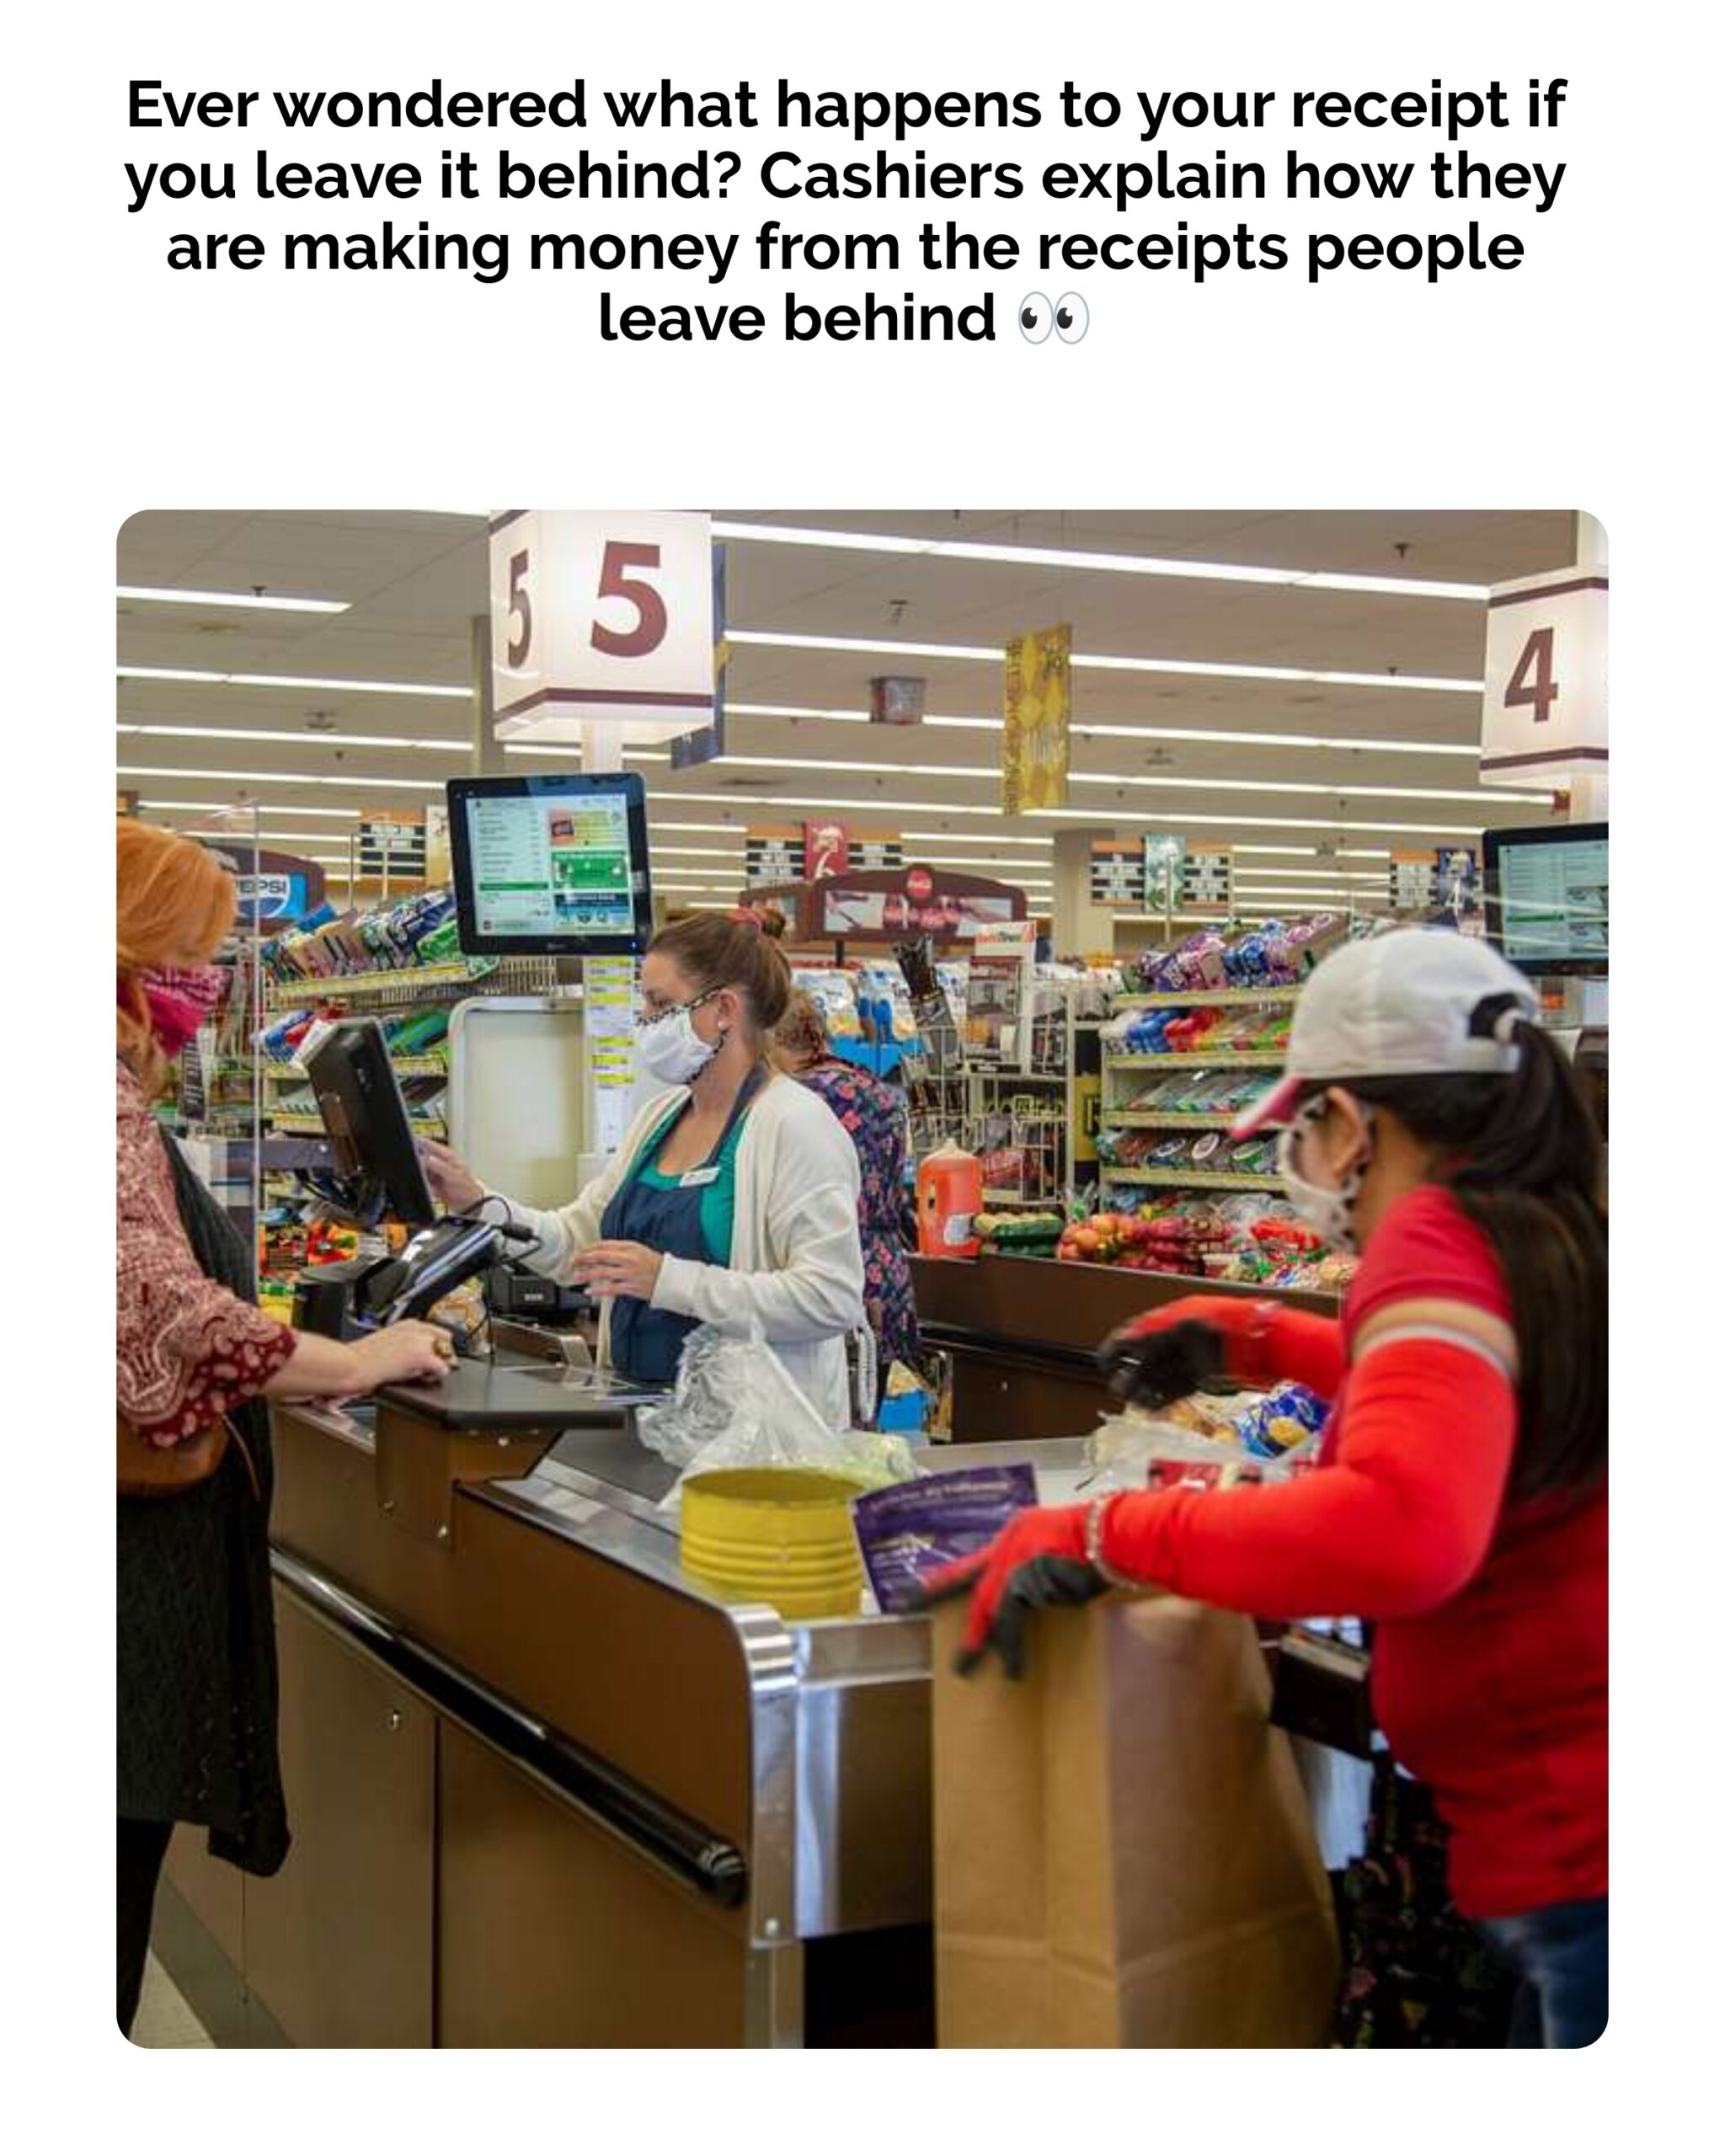 Cashiers Explain How They Are Making Money From The Receipts People Leave Behind